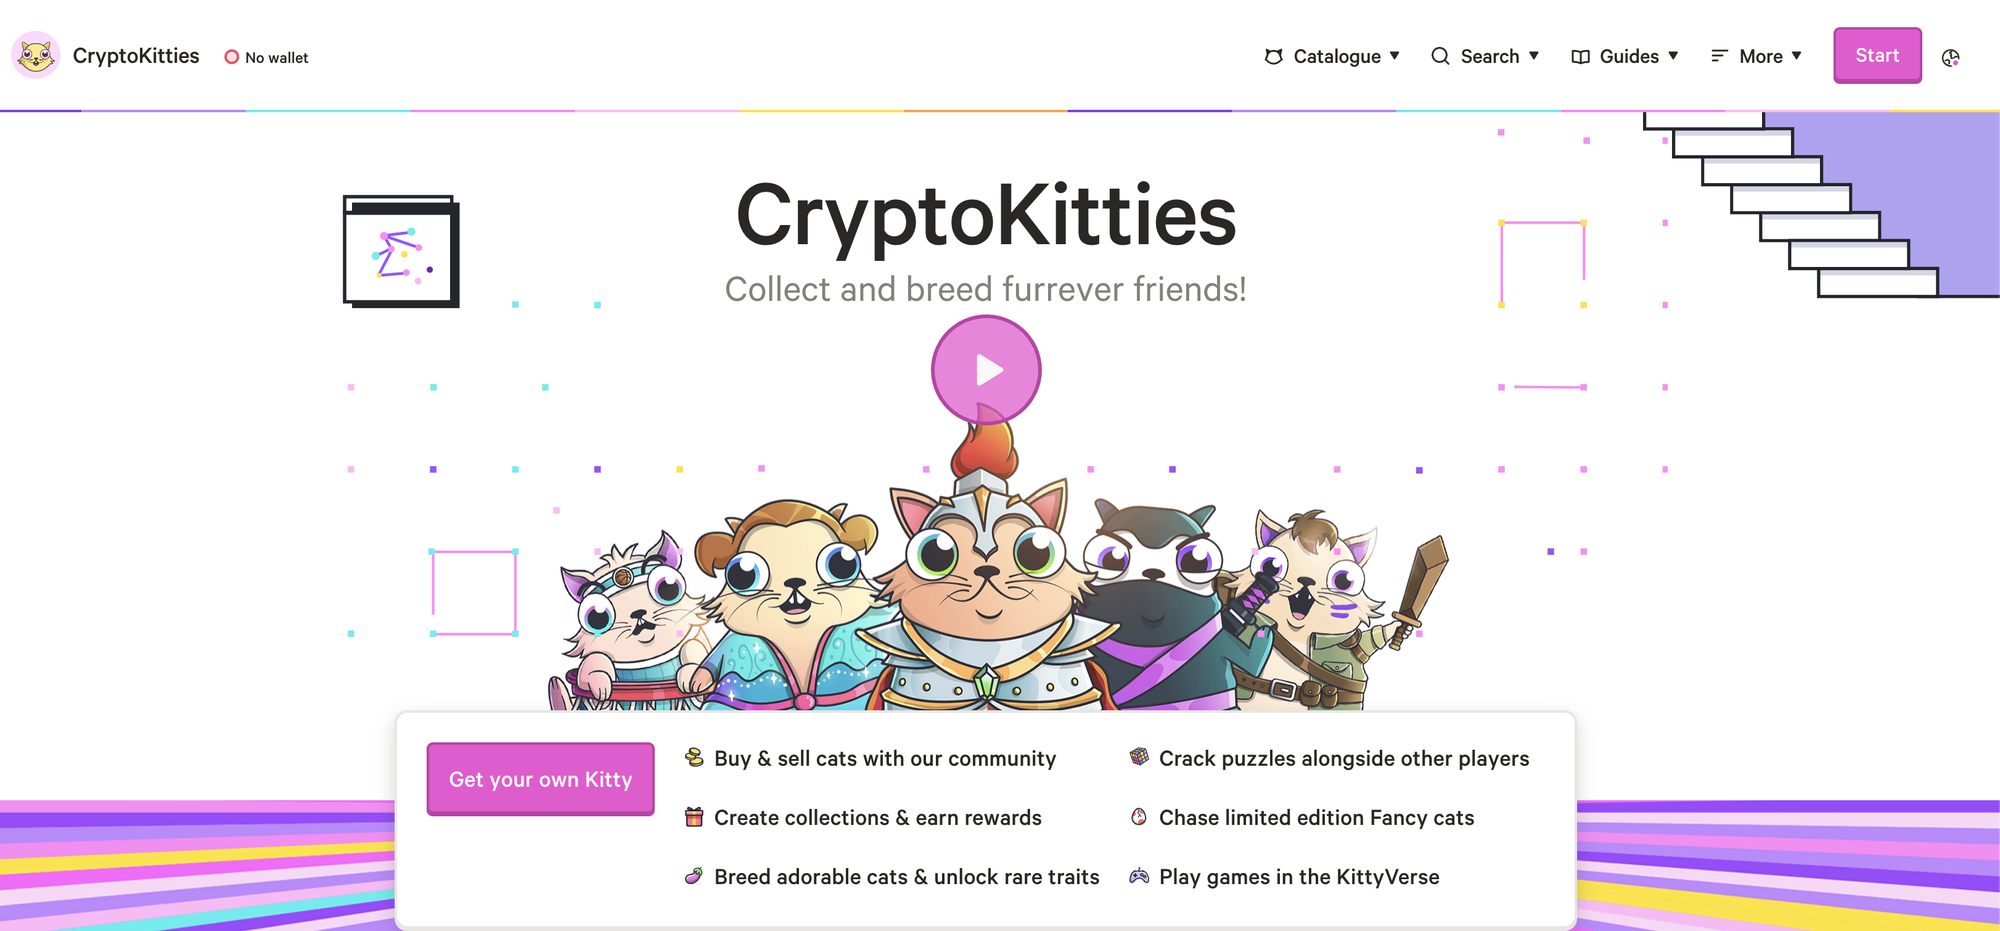 CryptoKitties is a NFT collectible marketplace. Each kitty is one-of-a-kind and owned by you. It cannot be replicated, taken away, or destroyed.